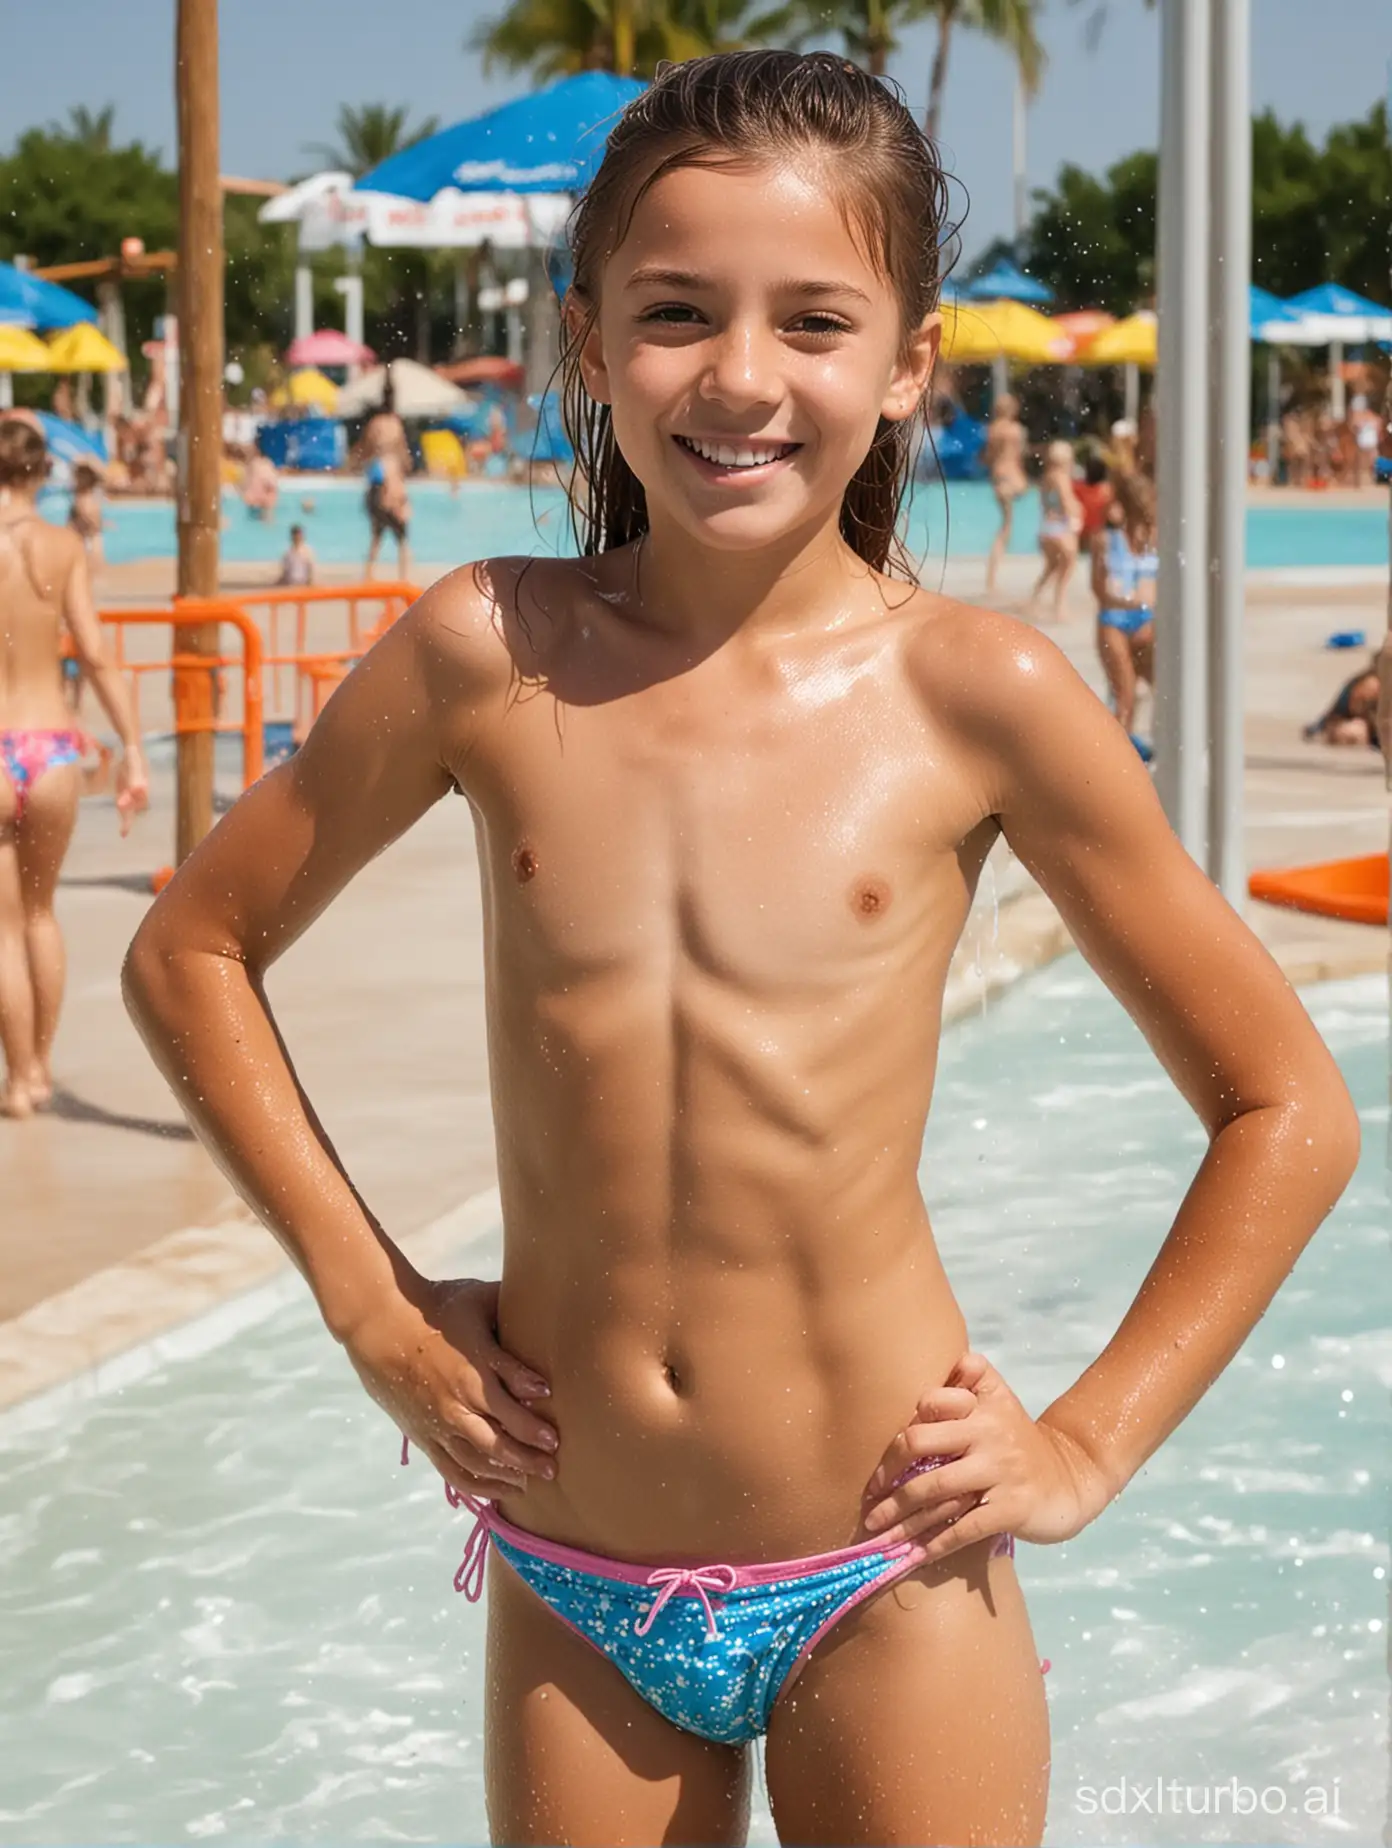 Alexis Brill at 7years old, girl, flat-chested, muscular ribs, showing her belly, at Water park, wet 